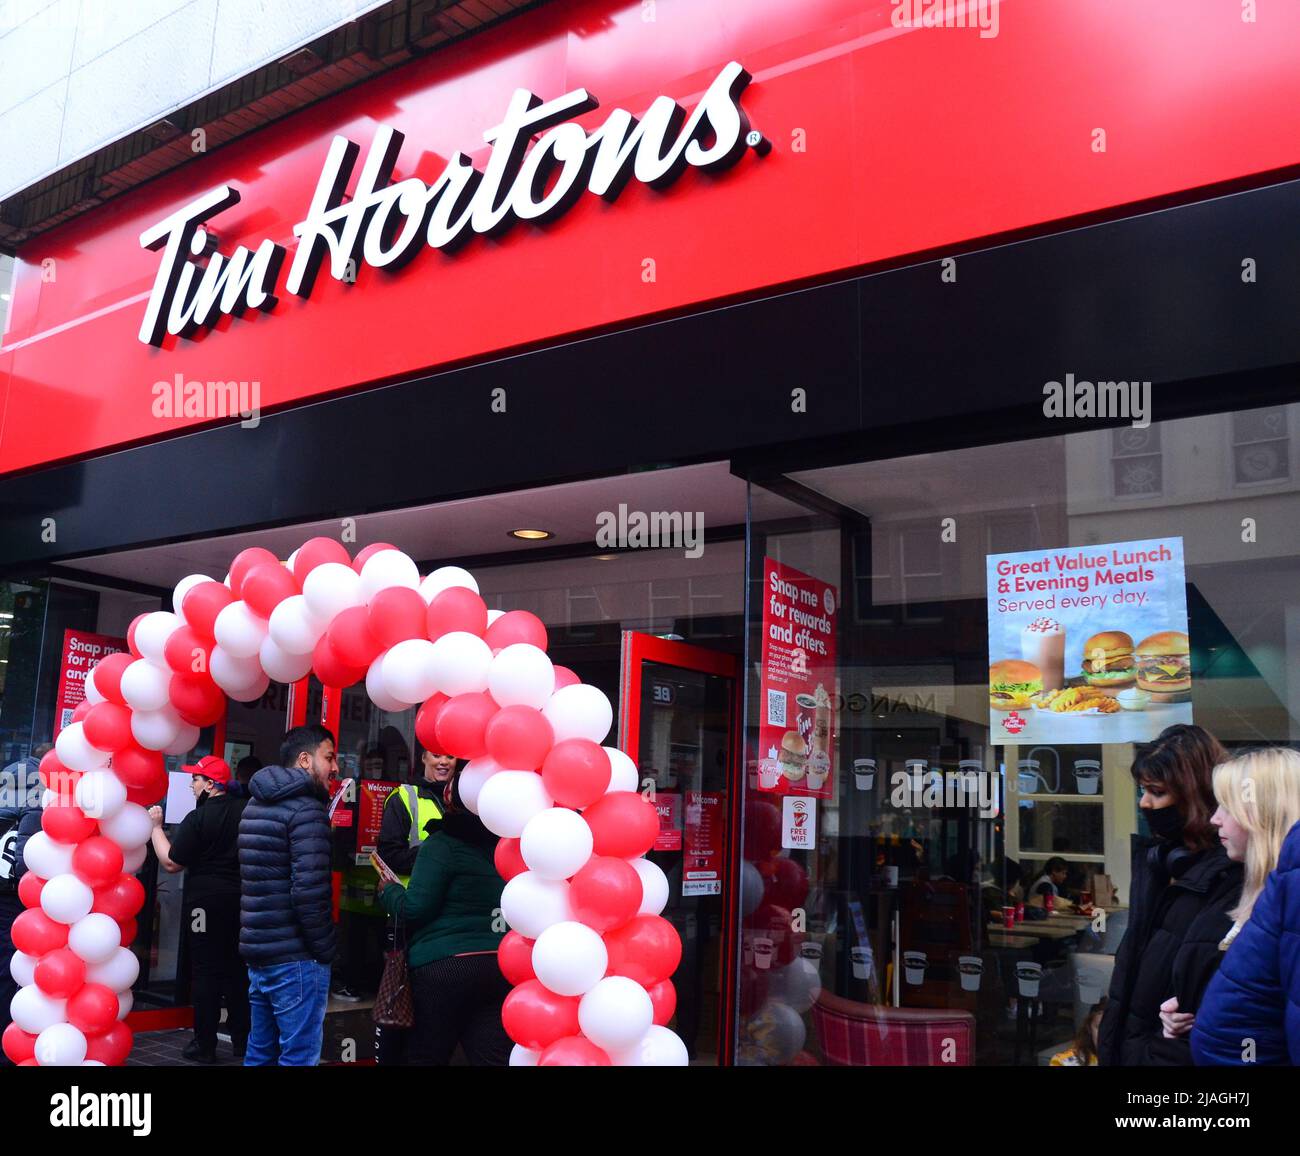 Tim Hortons Chichester: A first look at the new fast food coffee chain